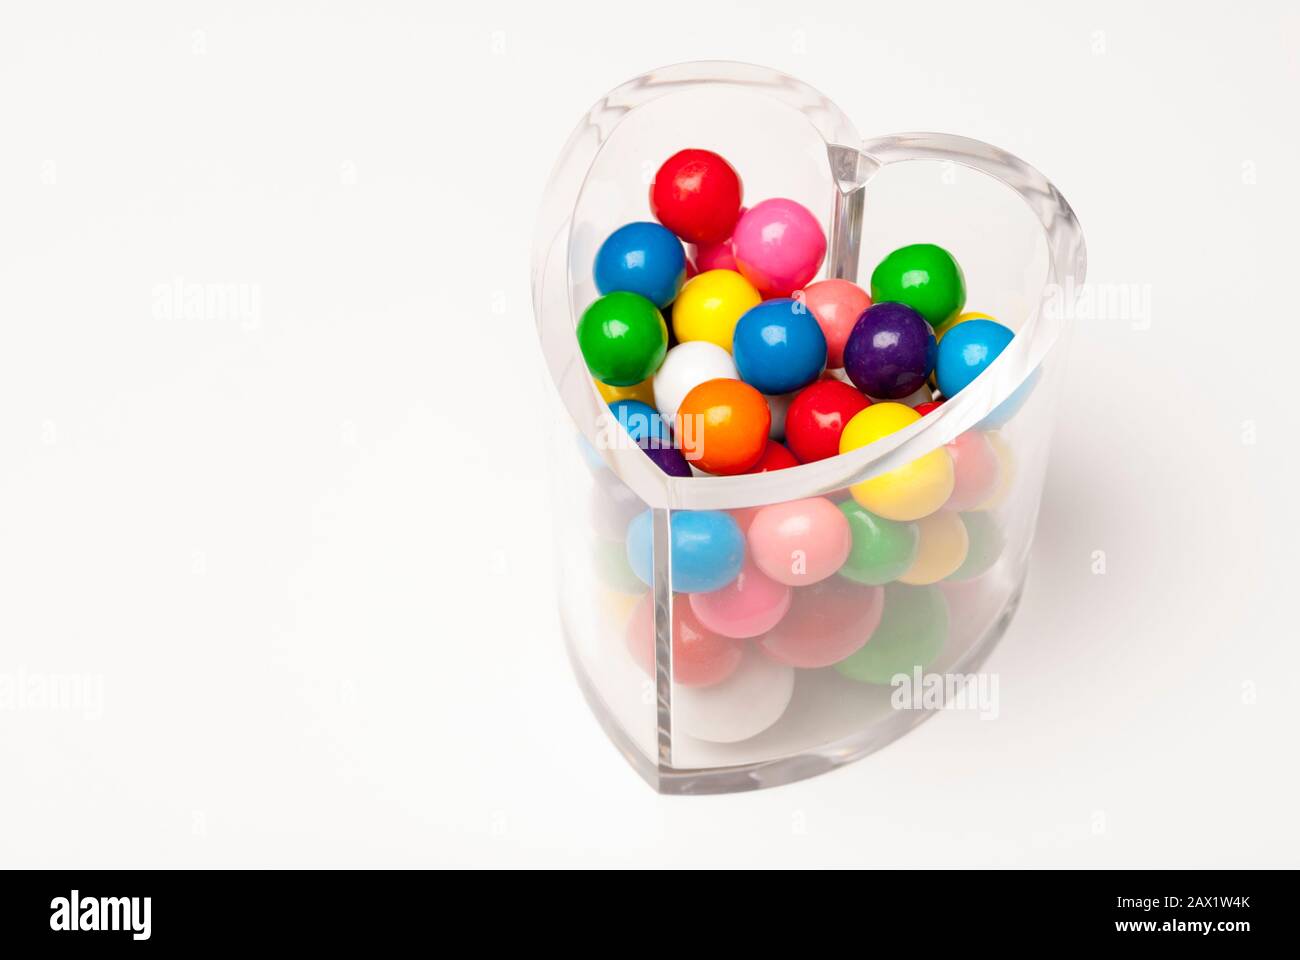 Clear heart-shaped candy jar filled with bright, colorful Valentine gumball candies on white background Stock Photo